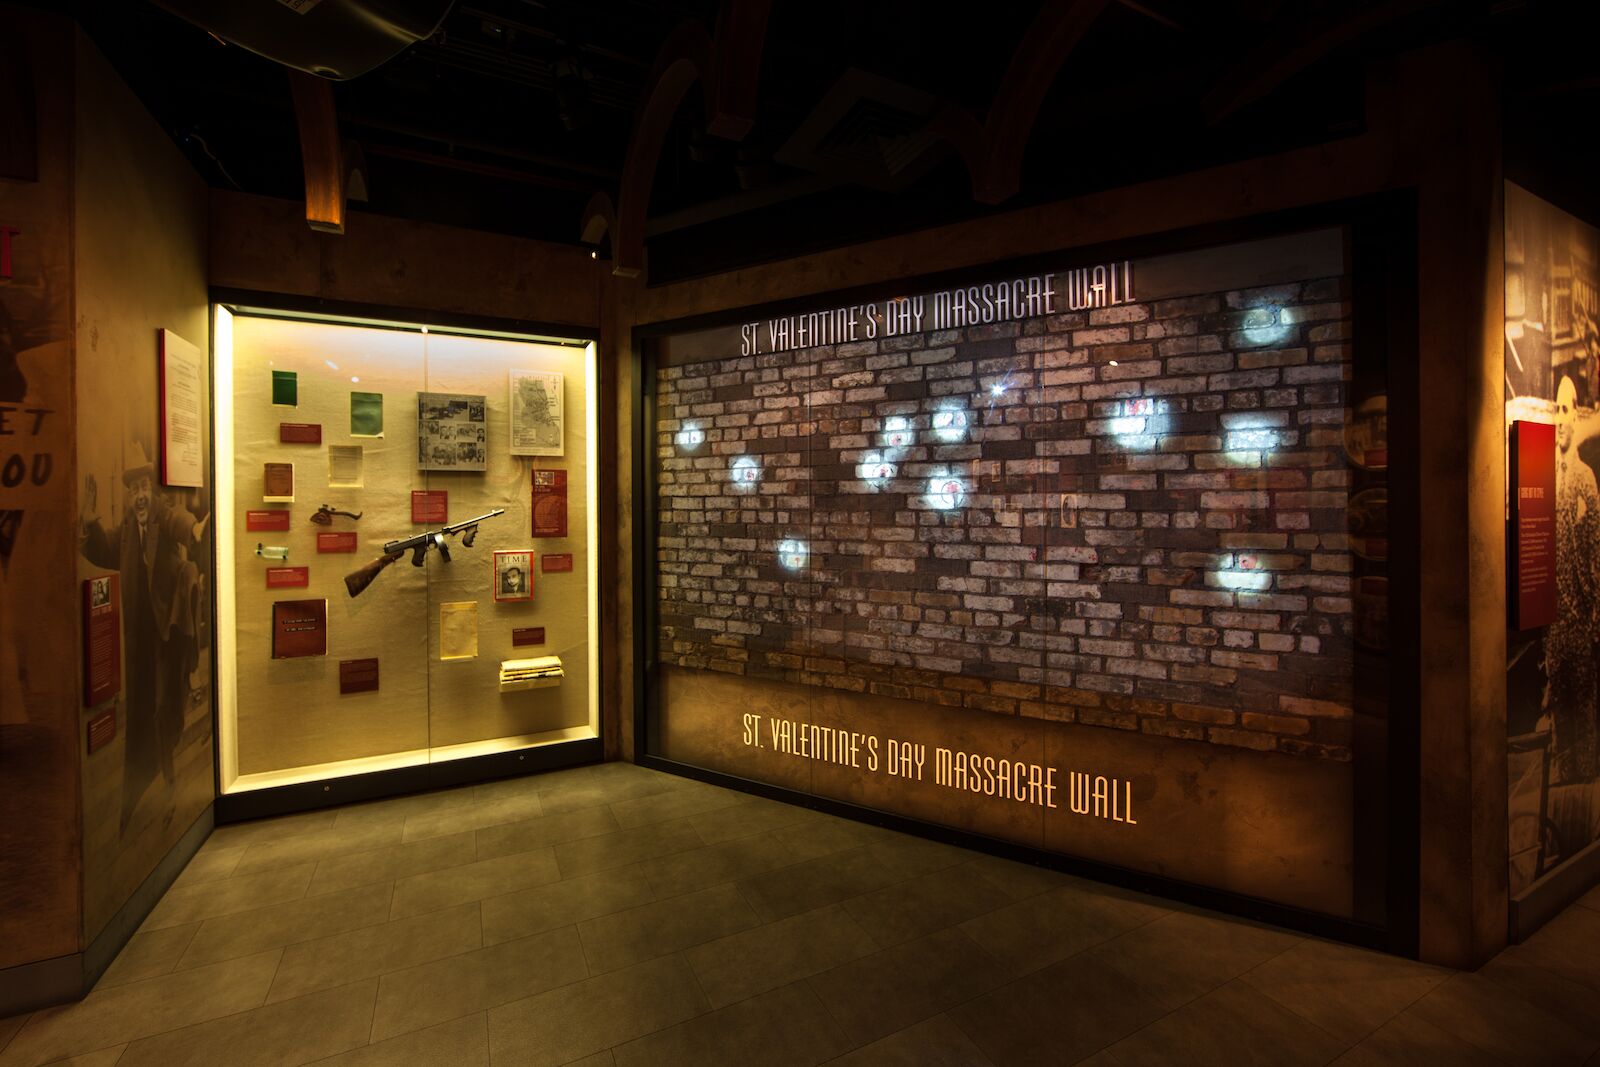 St. Valentine’s Day Massacre Wall at the Las Vegas Mob Museum